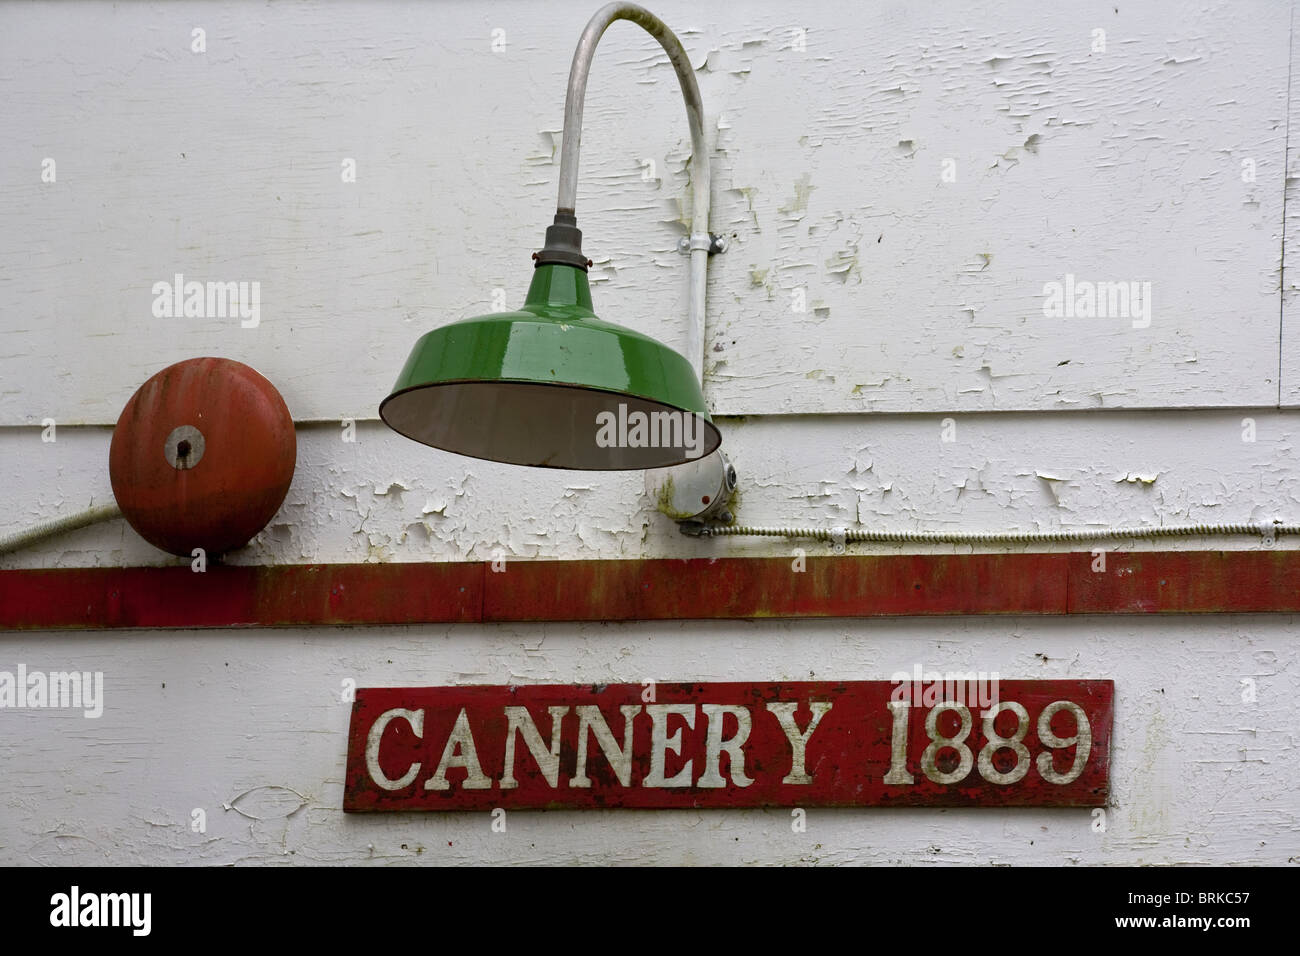 Entrance to North Pacific Cannery Museum Port Hardy British Columbia Canada Sept 2010 Stock Photo